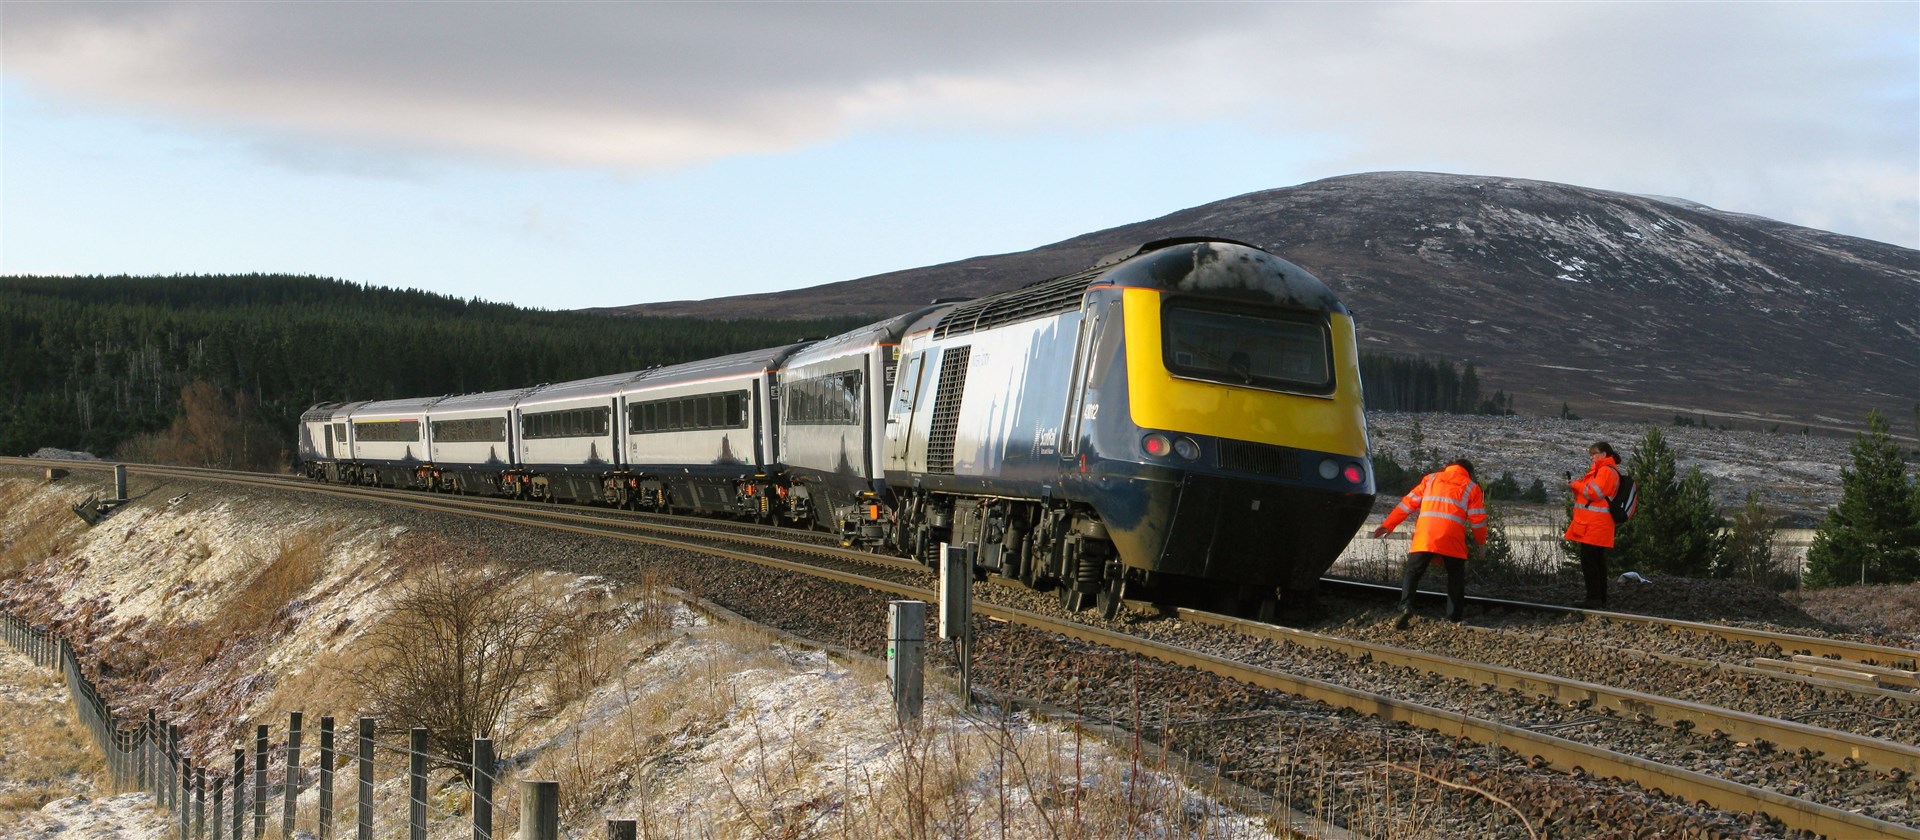 The derailed train caused major disruption to the Highland line.